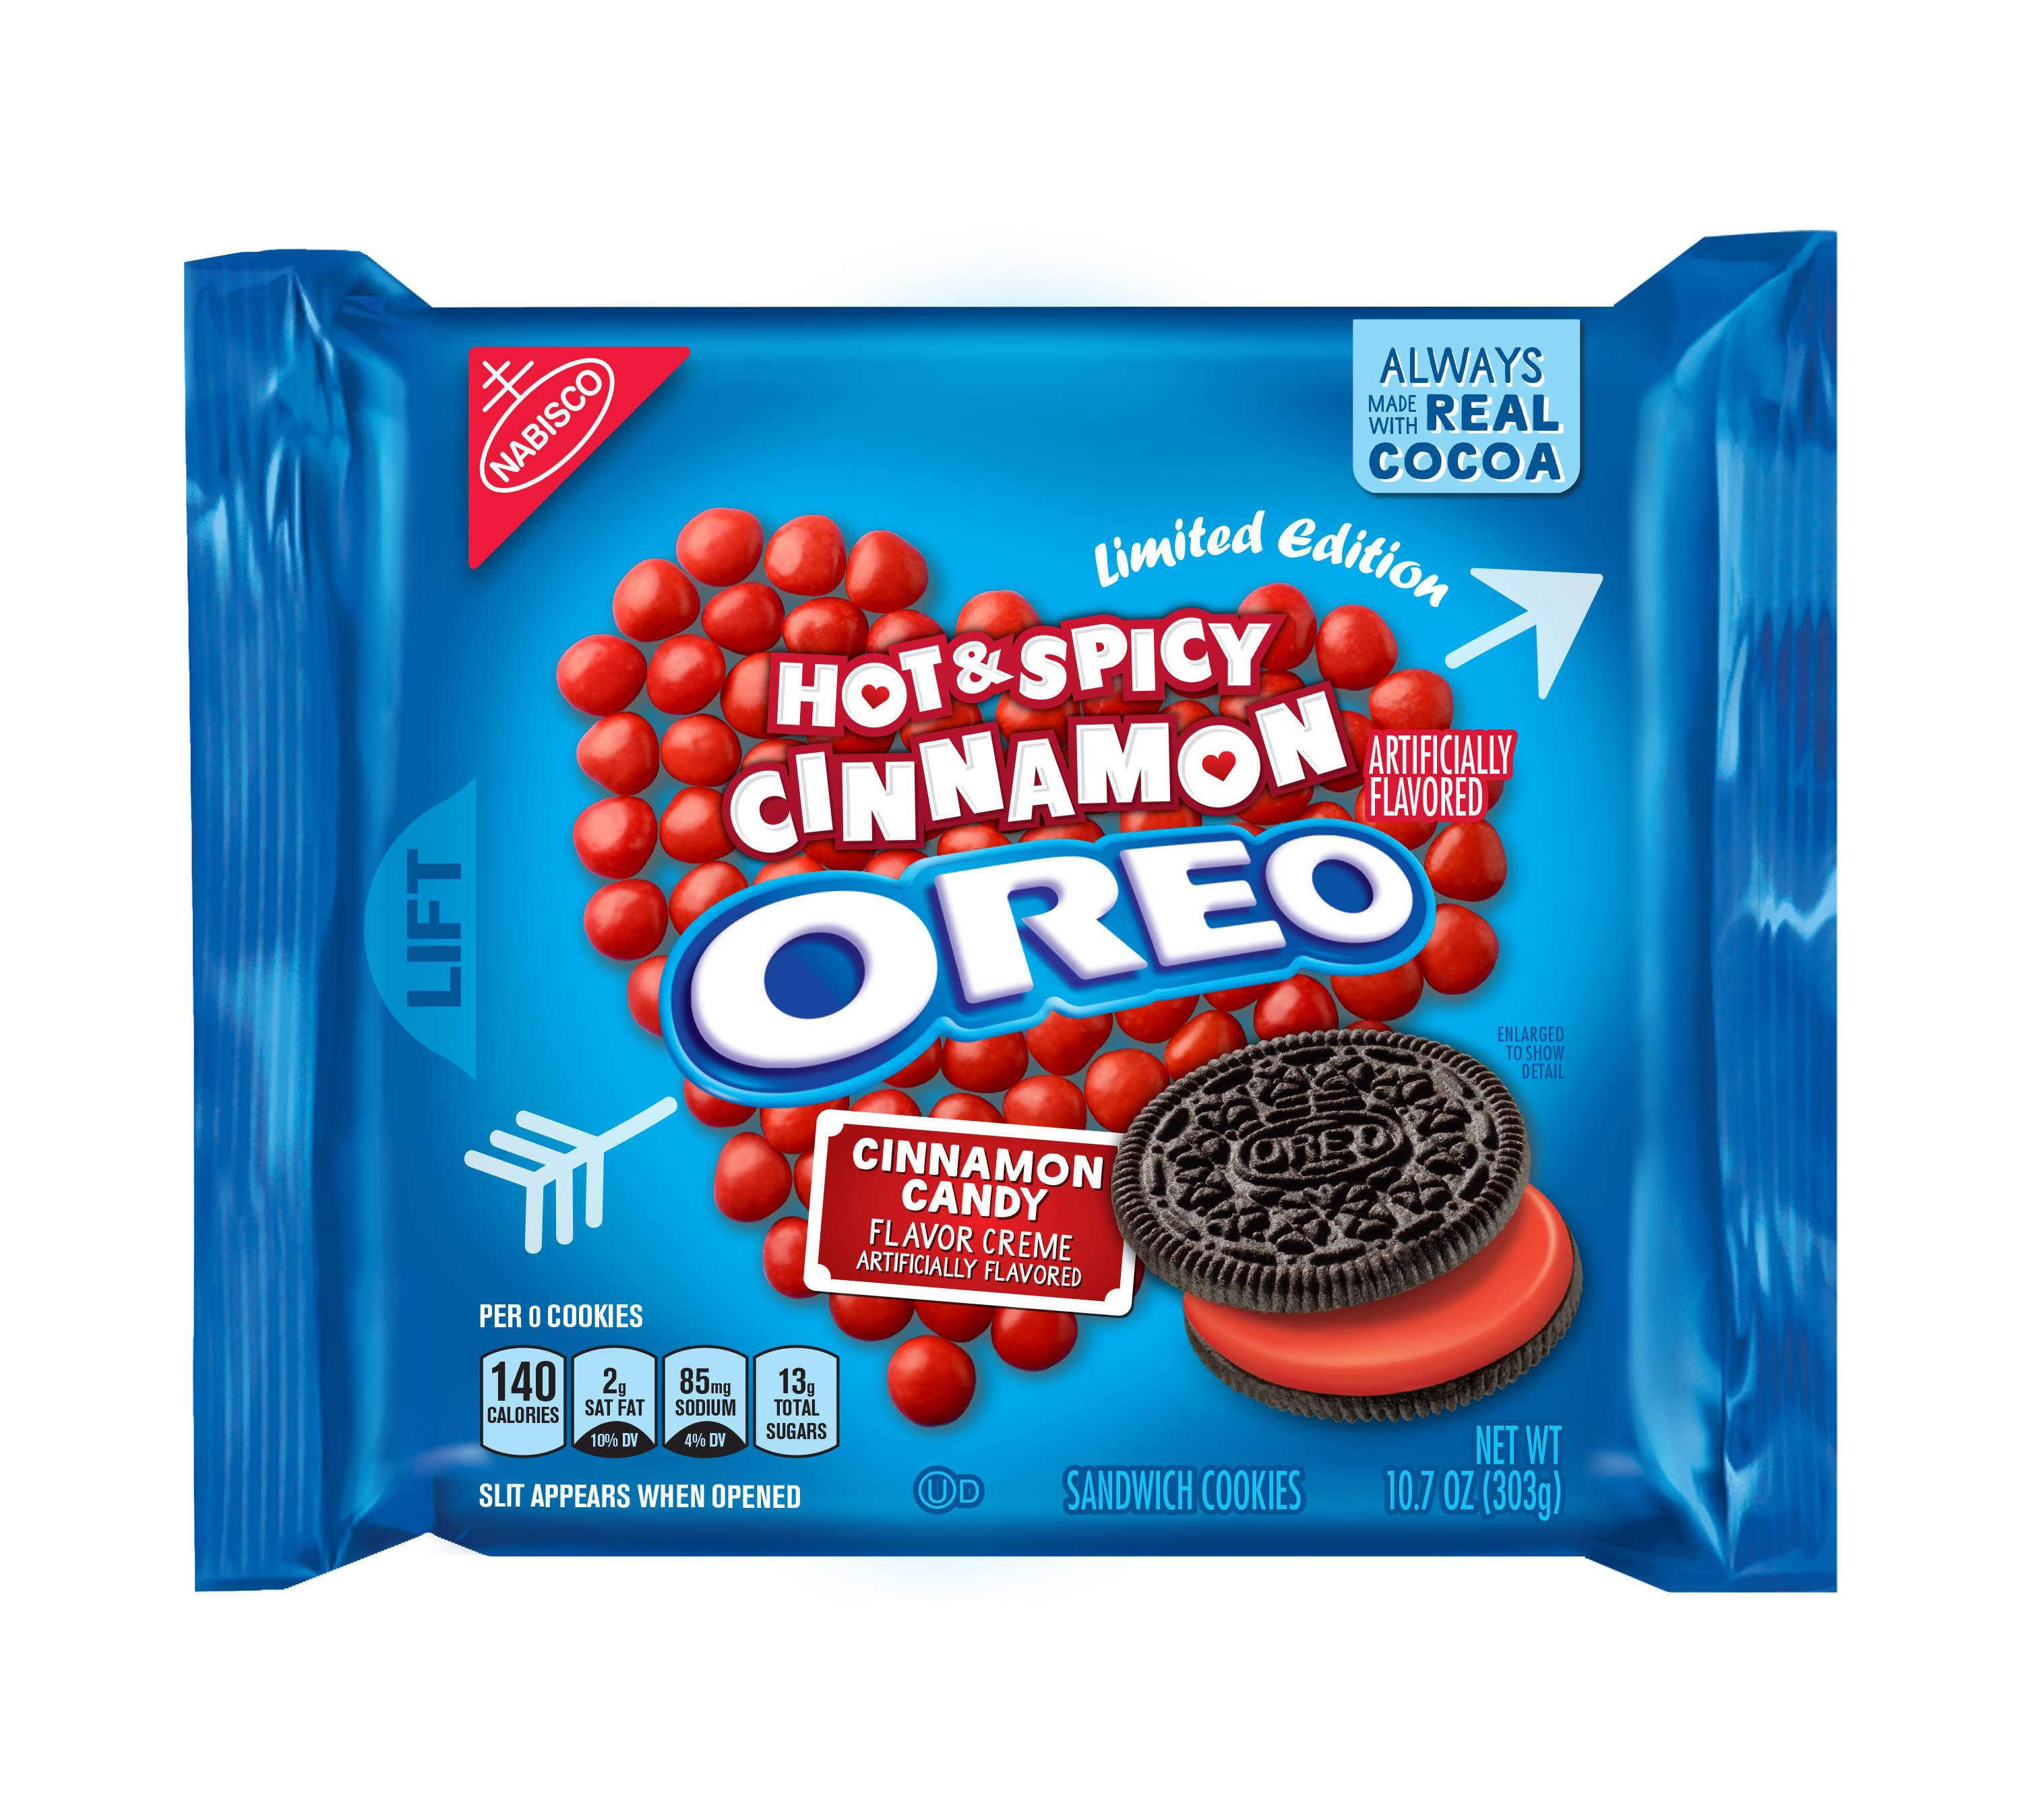 Hot and Spicy Cinnamon Oreo